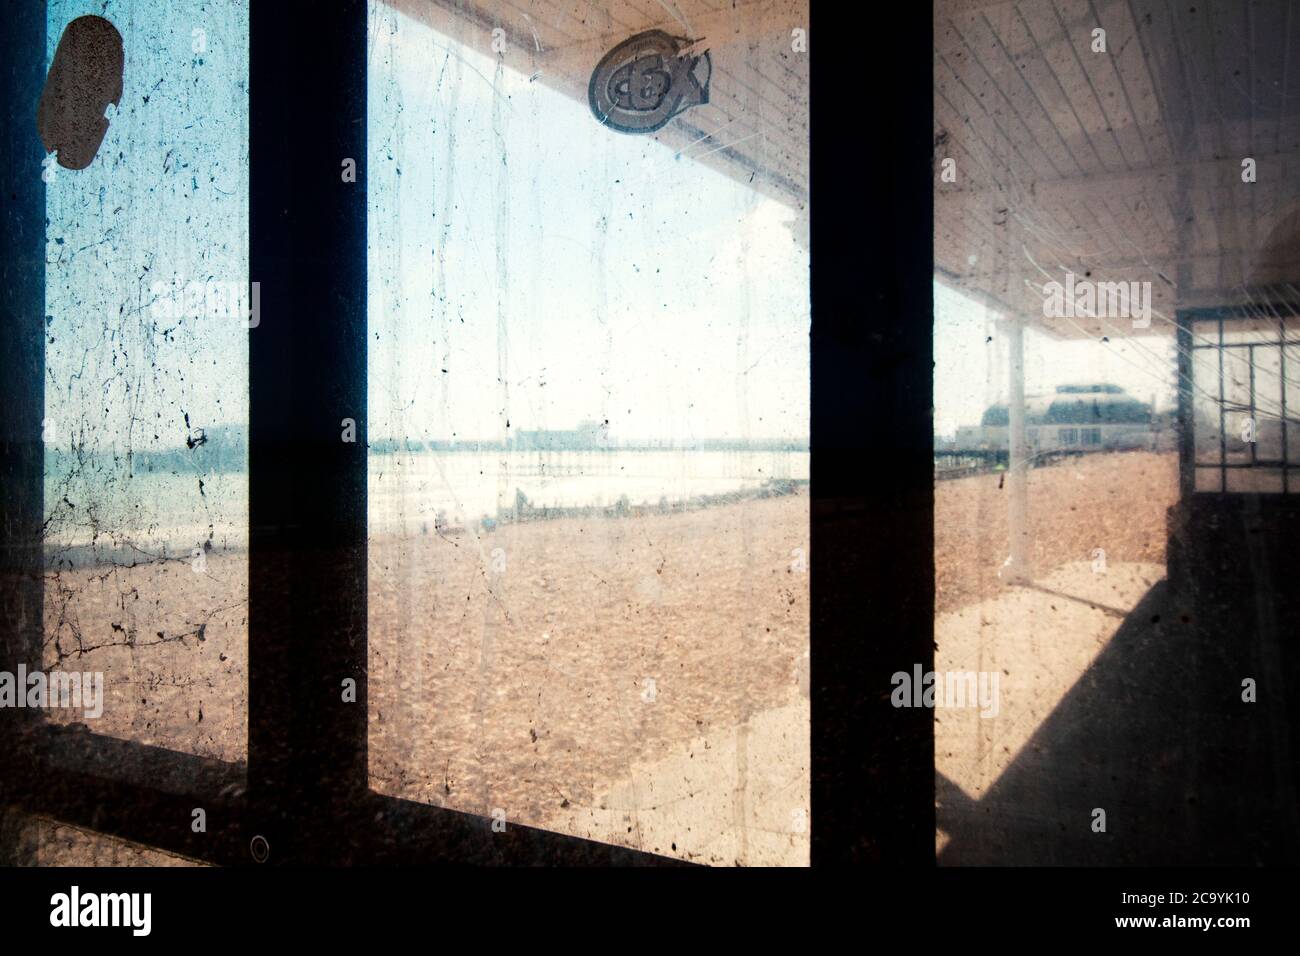 Looking through a dirty window a beach shelter on Worthing seafront, West Sussex, UK Stock Photo